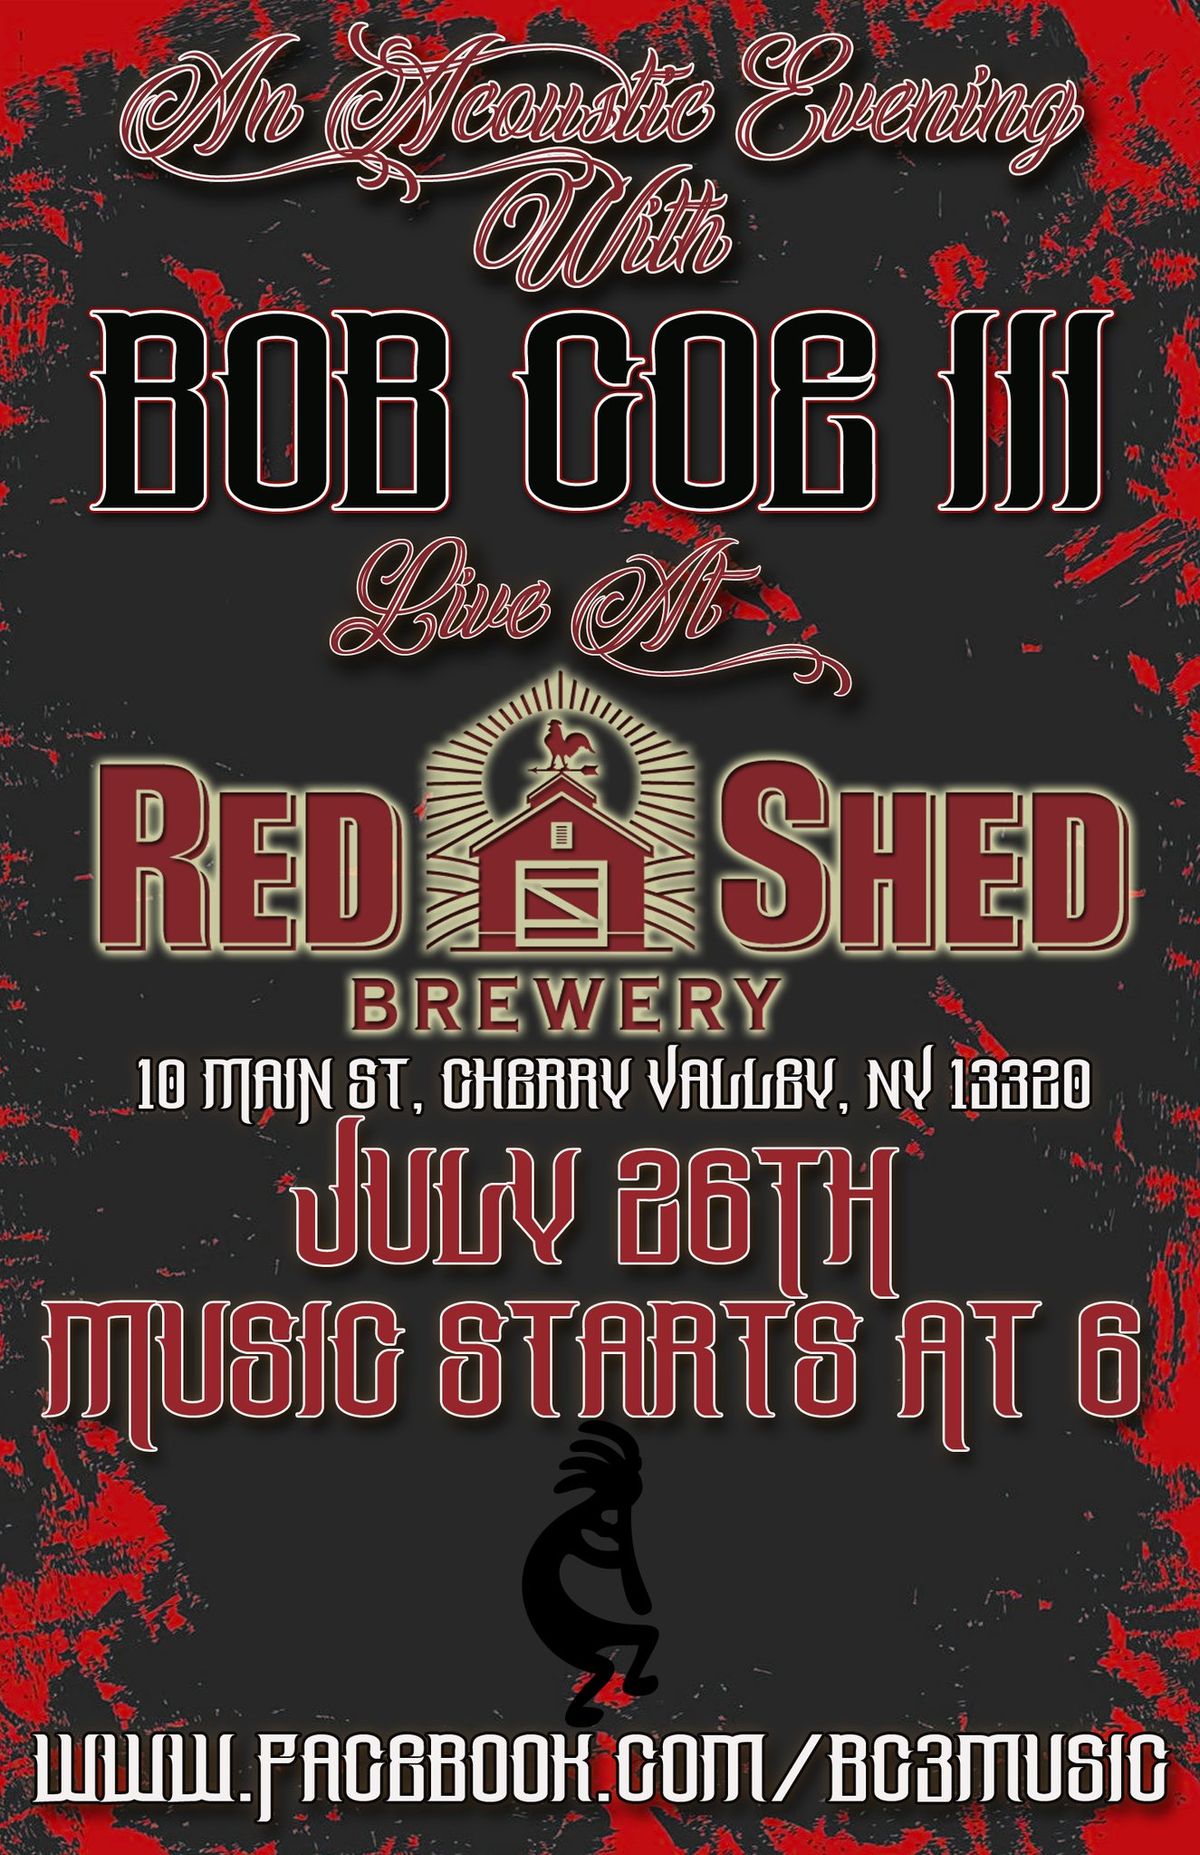 Bob Coe III: Live At Red Shed In Cherry Valley